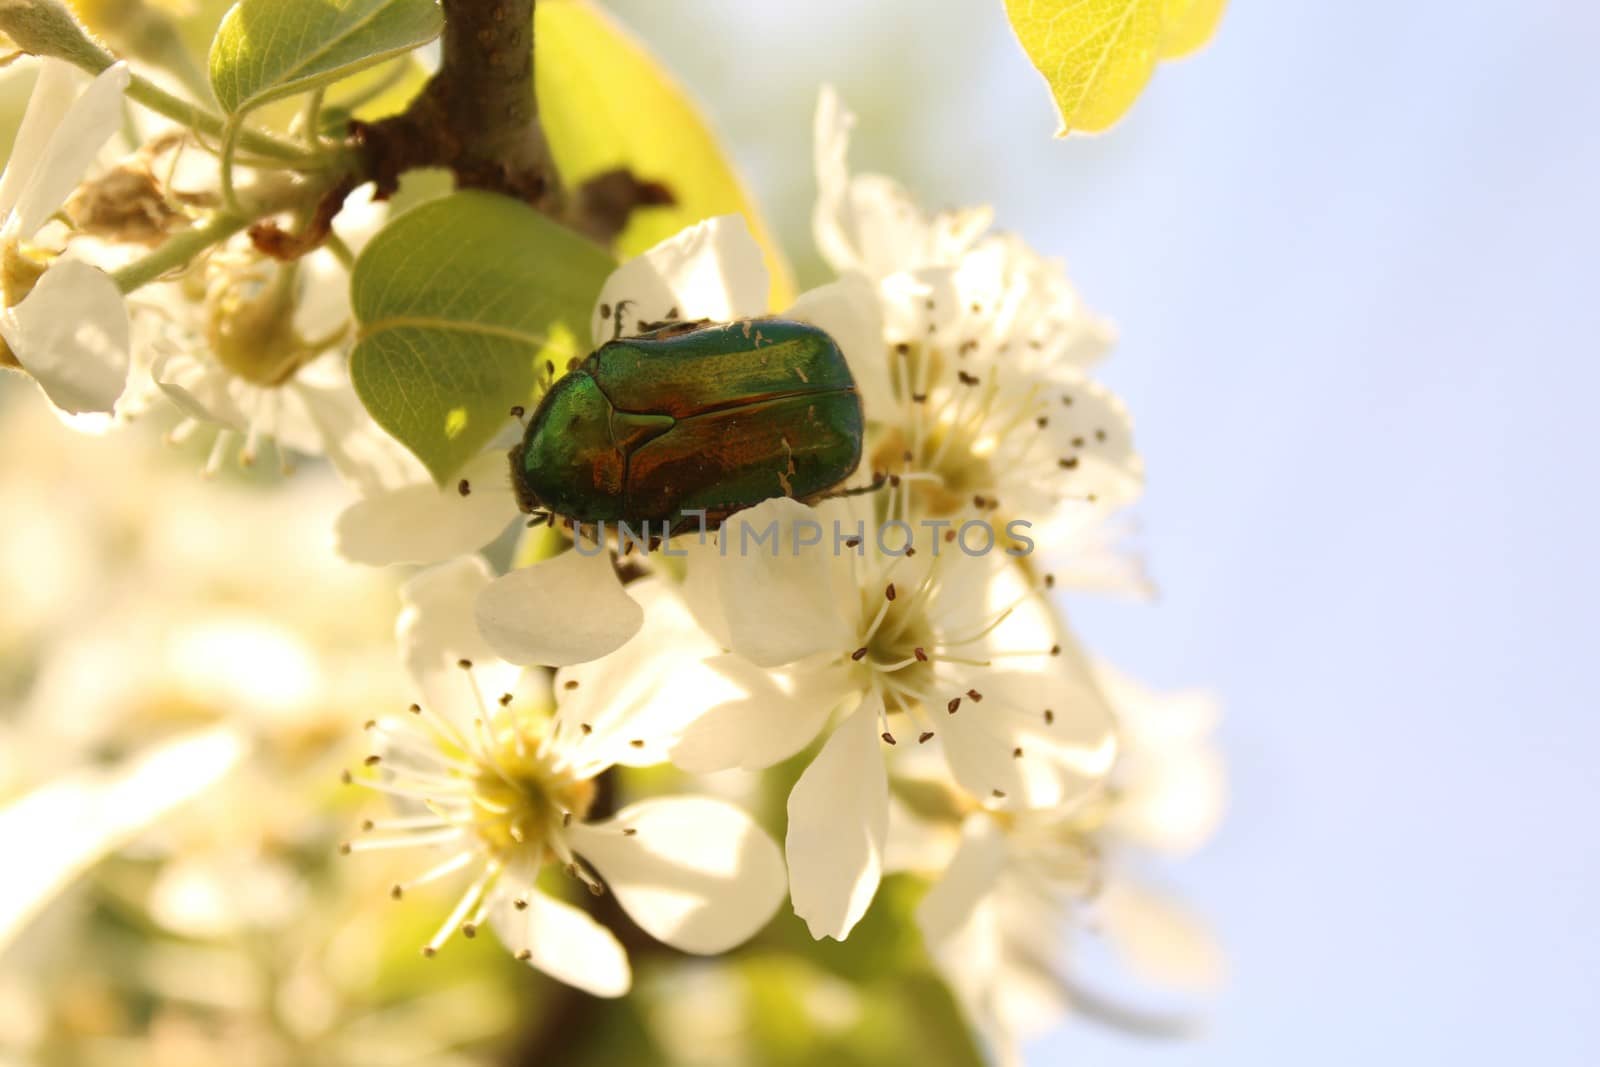 The picture shows a rose chafer in pear blossoms.